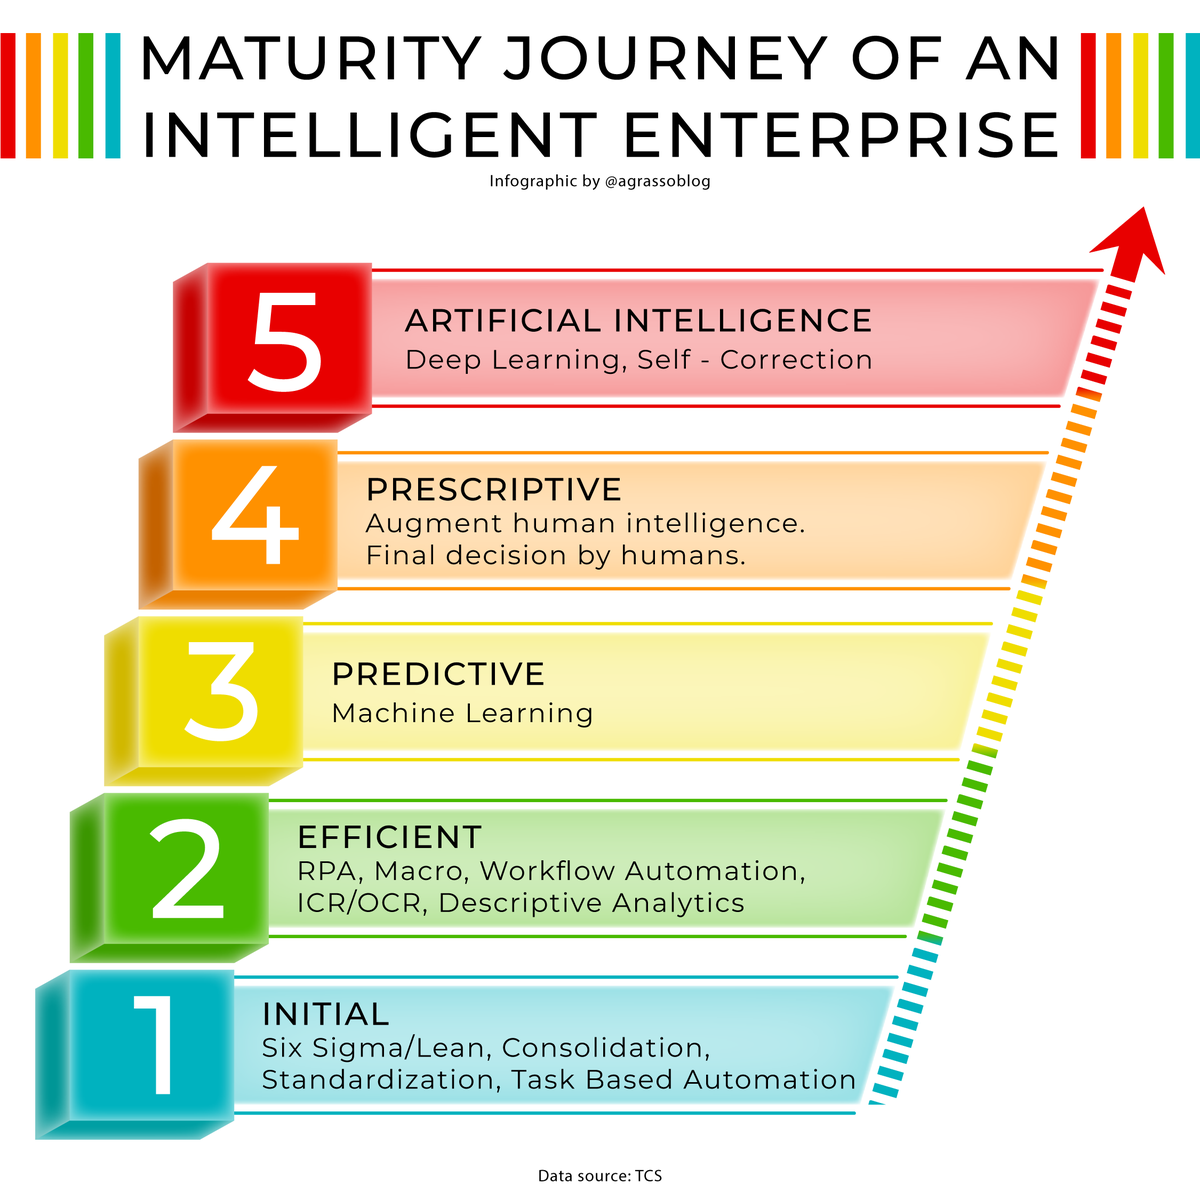 How to become an intelligent enterprise? Here's the maturity journey to embark.
{Infographic} @antgrasso via @LindaGrass0 #IntelligentEnterprise #DigitalTransformation #Tech